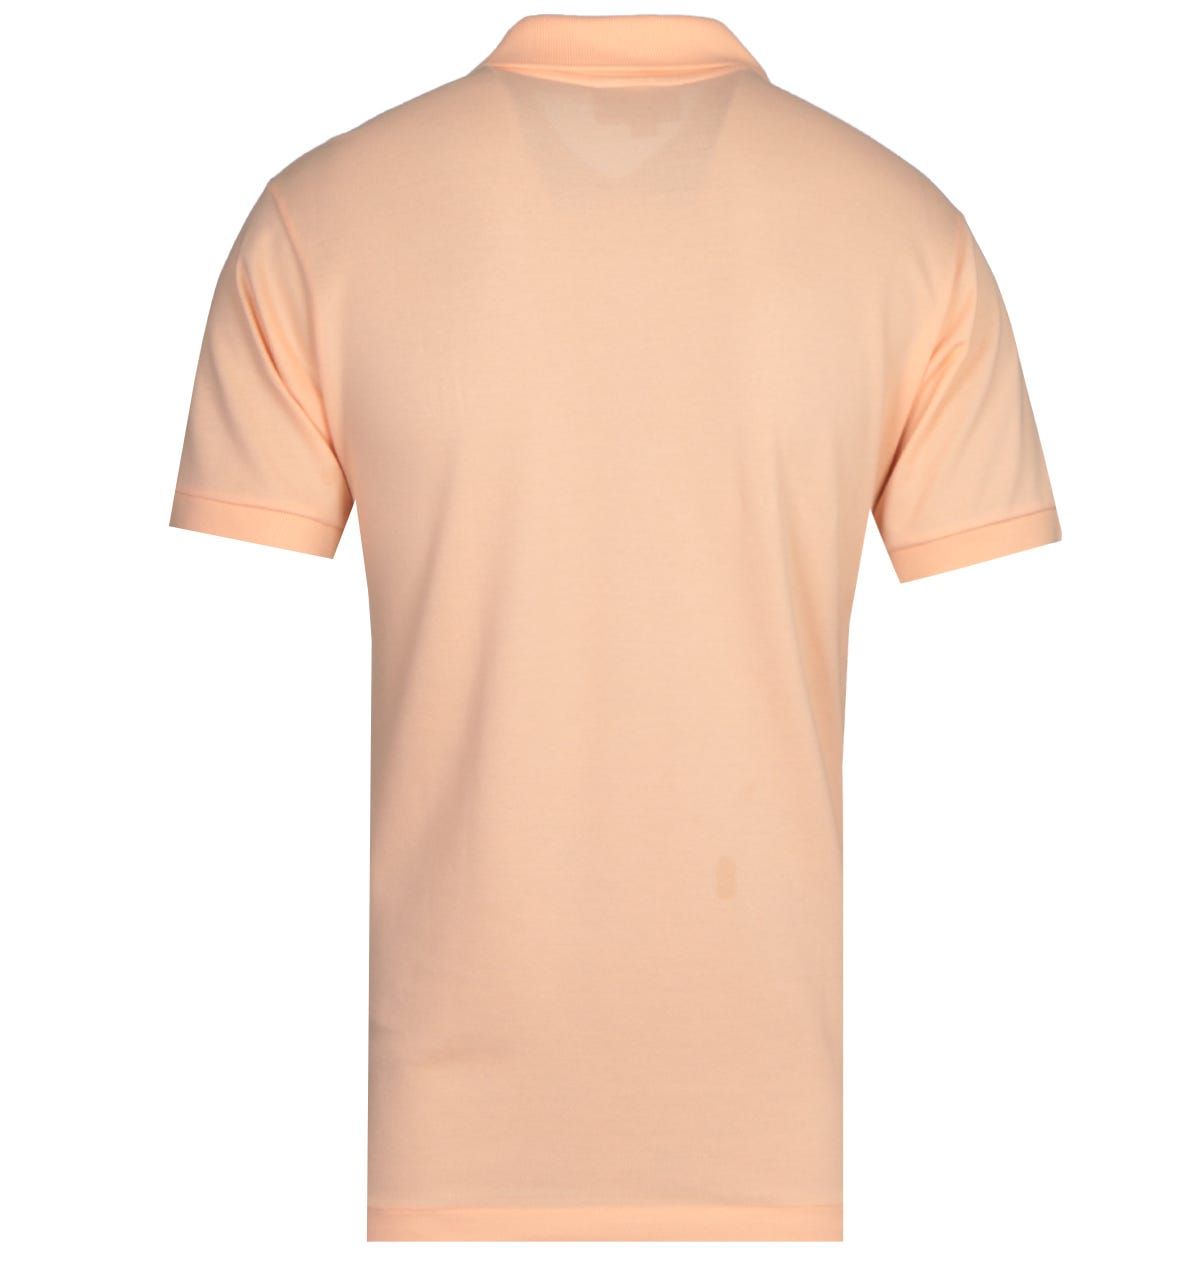 <p>A pure cotton composition crafted by Lacoste. The Lacoste Pink MC Homme Polo Shirt is fitted with a two-button placket, spread collar and ribbed trims. The design is finished with the Lacoste logo embroidered on the chest.</p><ul><li>Cotton composition</li><li>Two button placket</li><li>Tonal stitching</li><li>Ribbed trims</li><li>Lacoste logo embroidered on chest</li></ul><p>Style & Fit:</p><ul><li>Regular fit</li><li>Fits true to size</li></ul><p>Fabric Composition & Care:</p><ul><li>100% Cotton</li><li>Machine washable</li></ul>